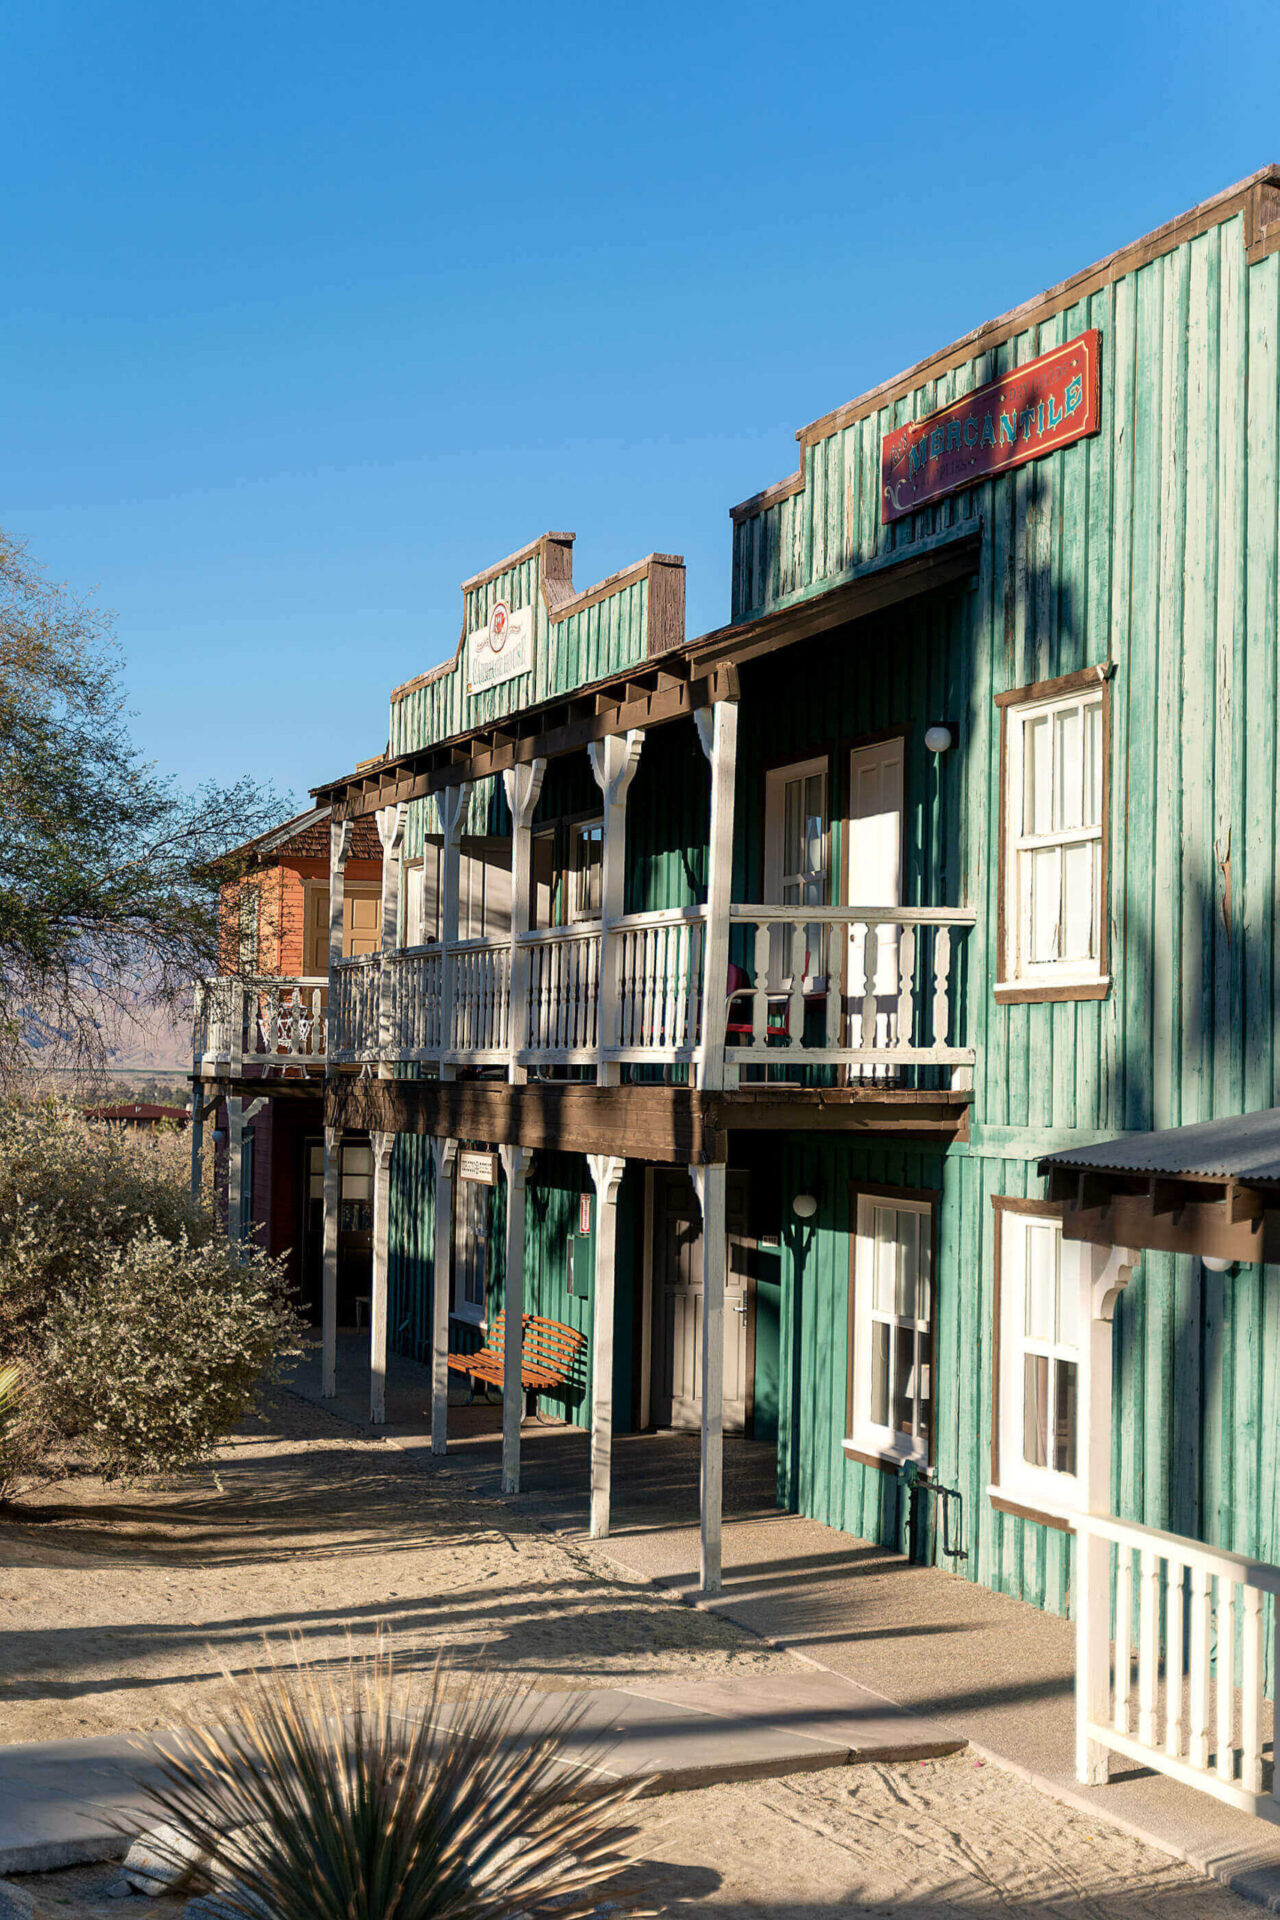 Rest Your Bones and Rustle Up Some Fun at the Best Resort in Borrego Springs